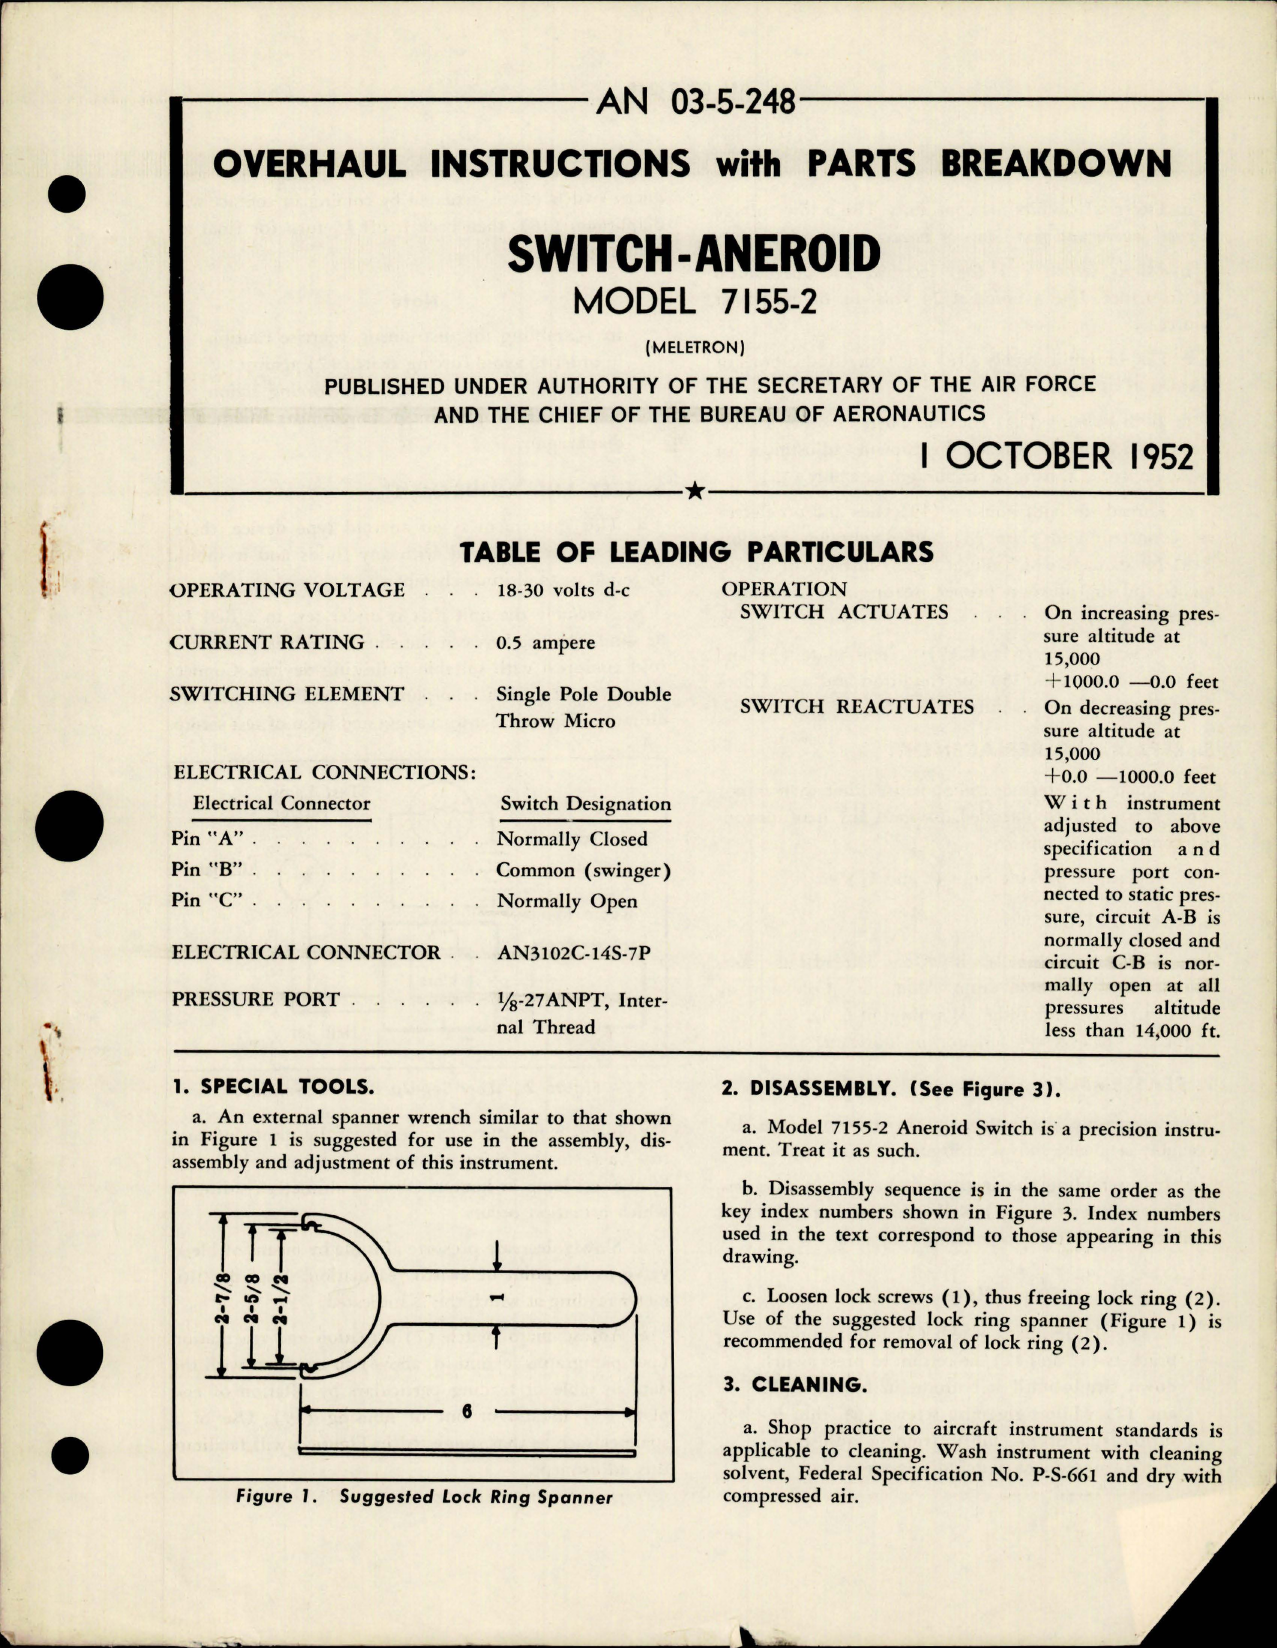 Sample page 1 from AirCorps Library document: Overhaul Instructions with Parts Breakdown for Switch Aneroid - Model 7155-2 